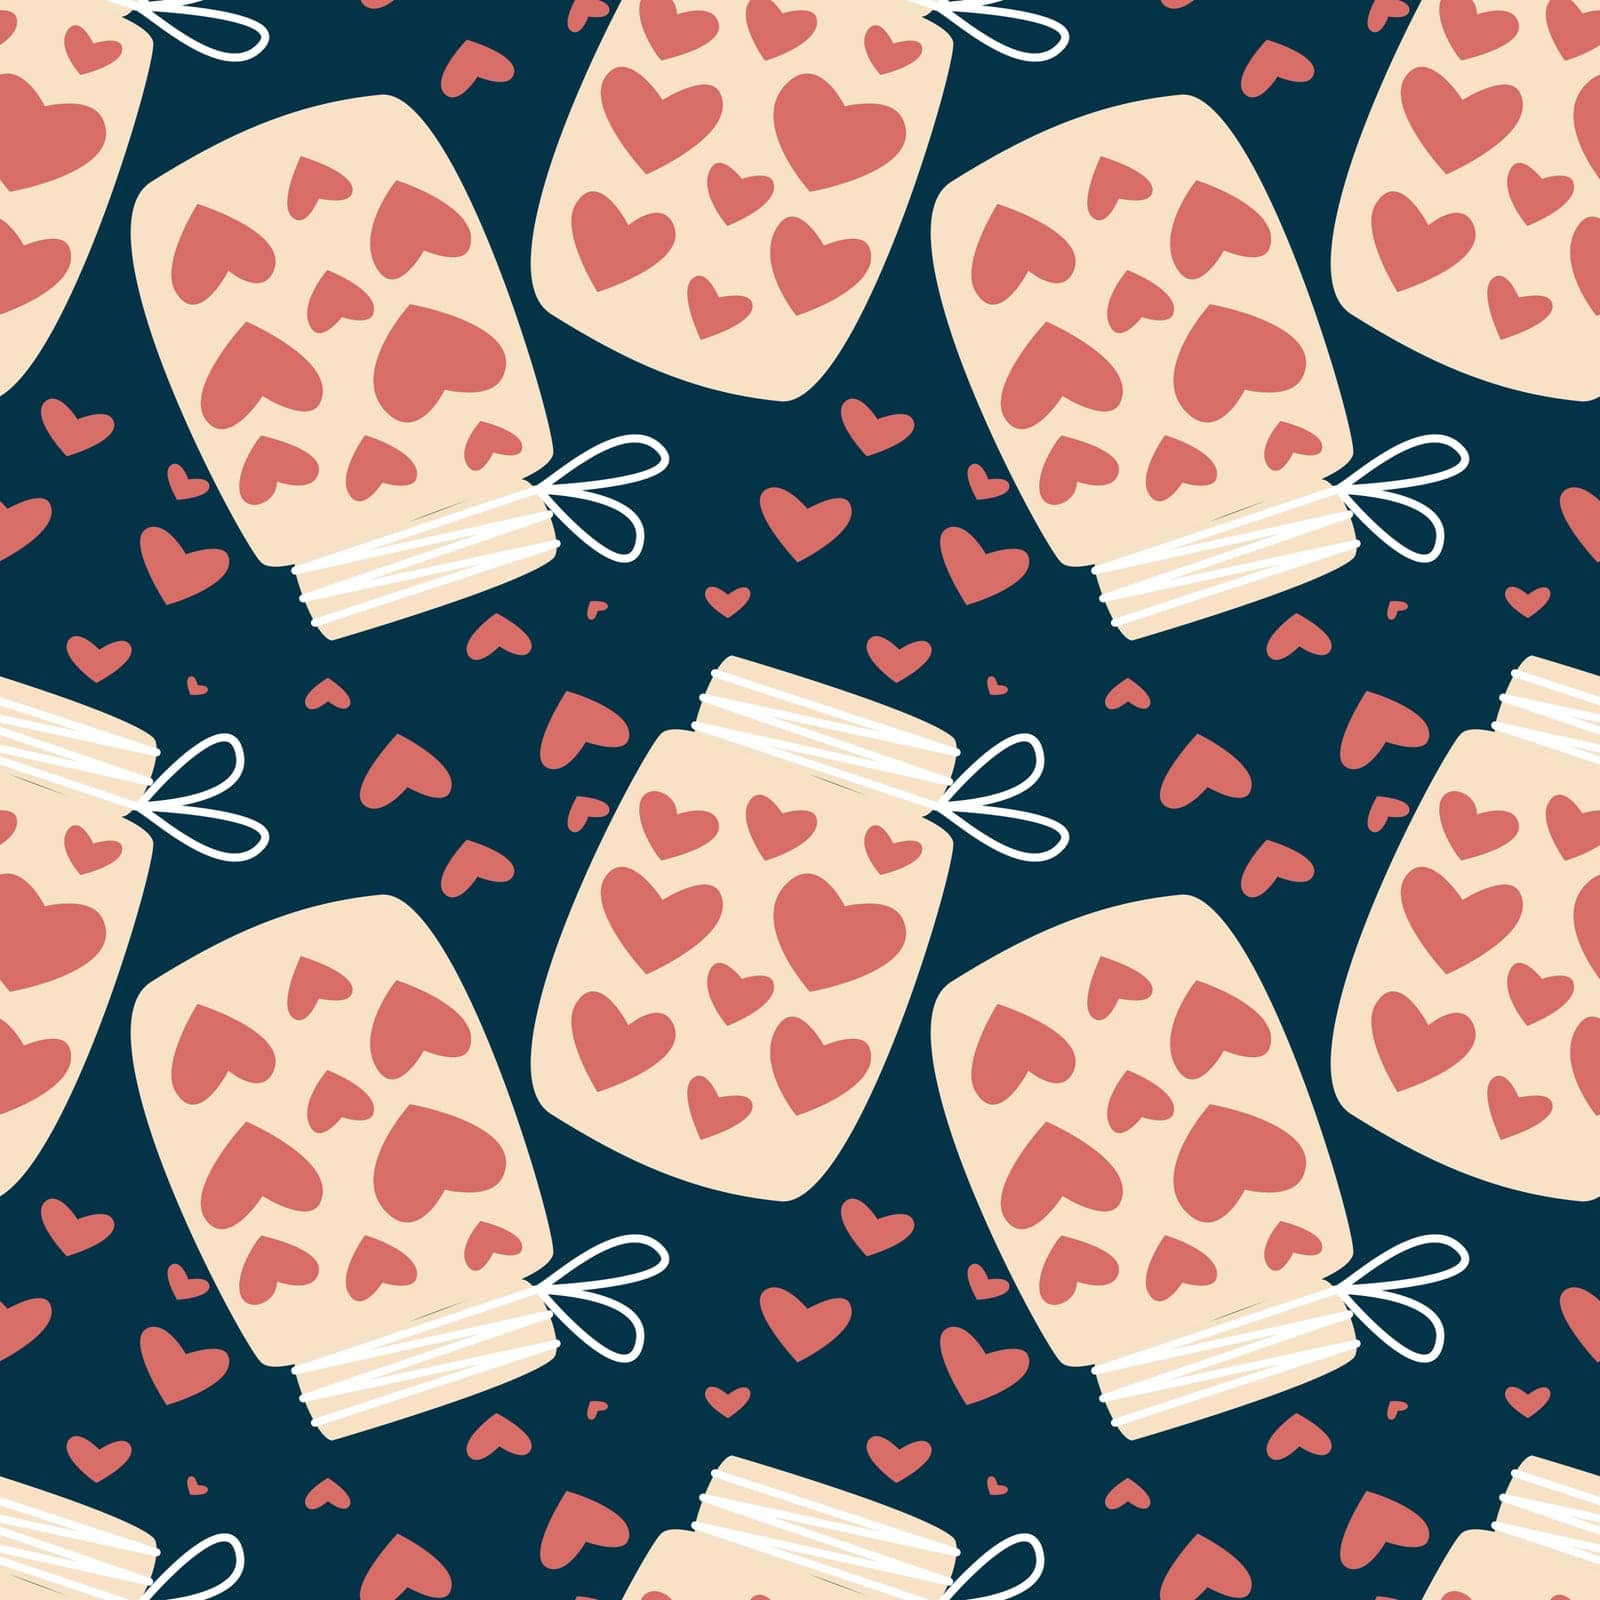 Hearts collected in jars seamless pattern by TassiaK